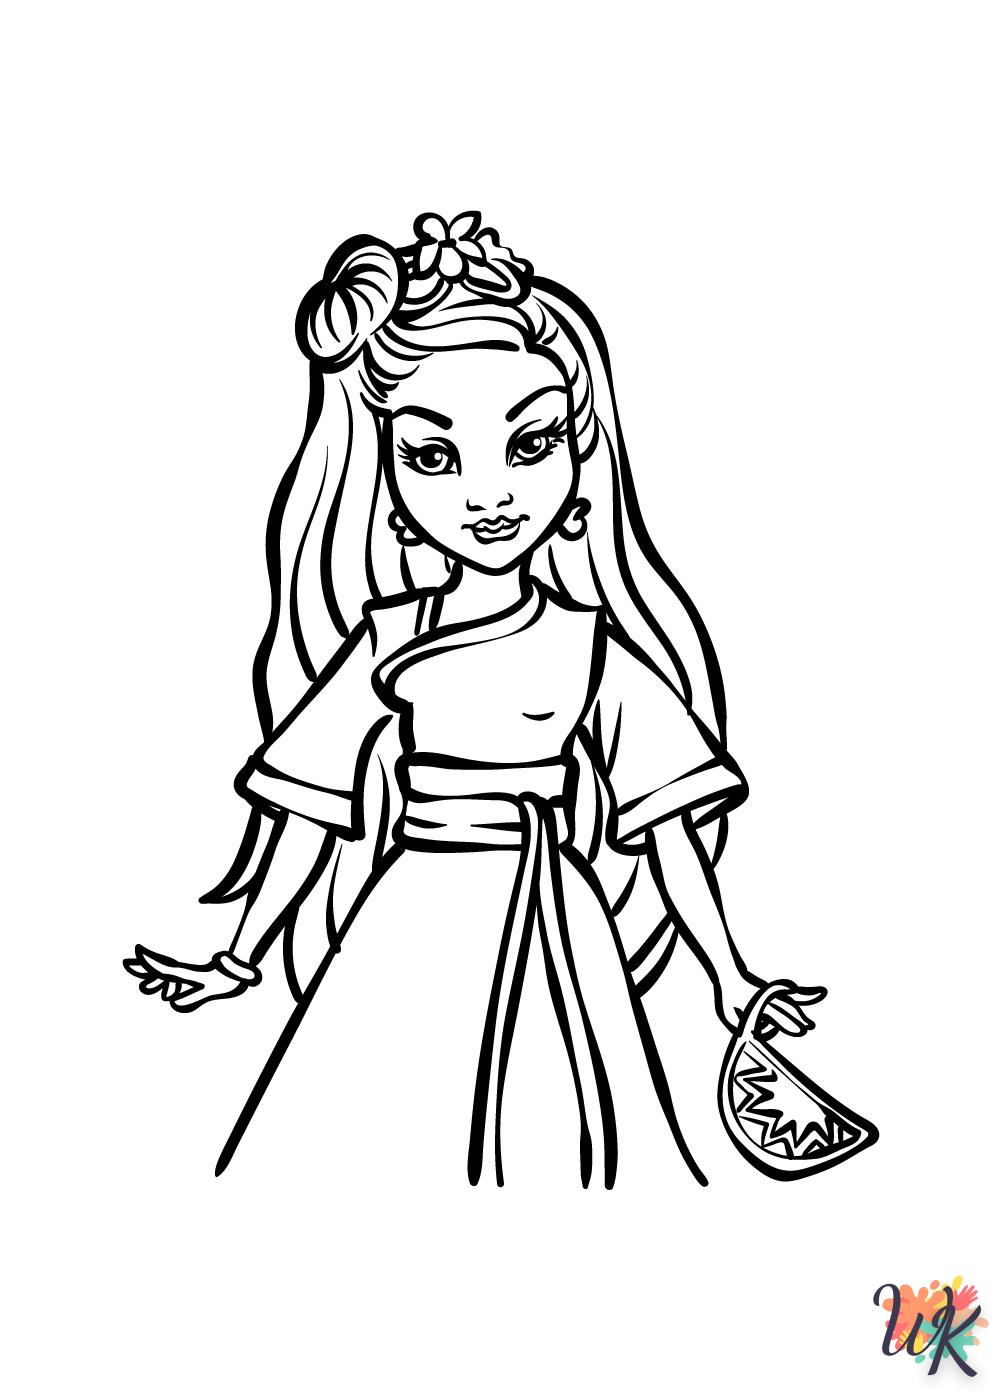 Disney coloring pages for children to print free 2